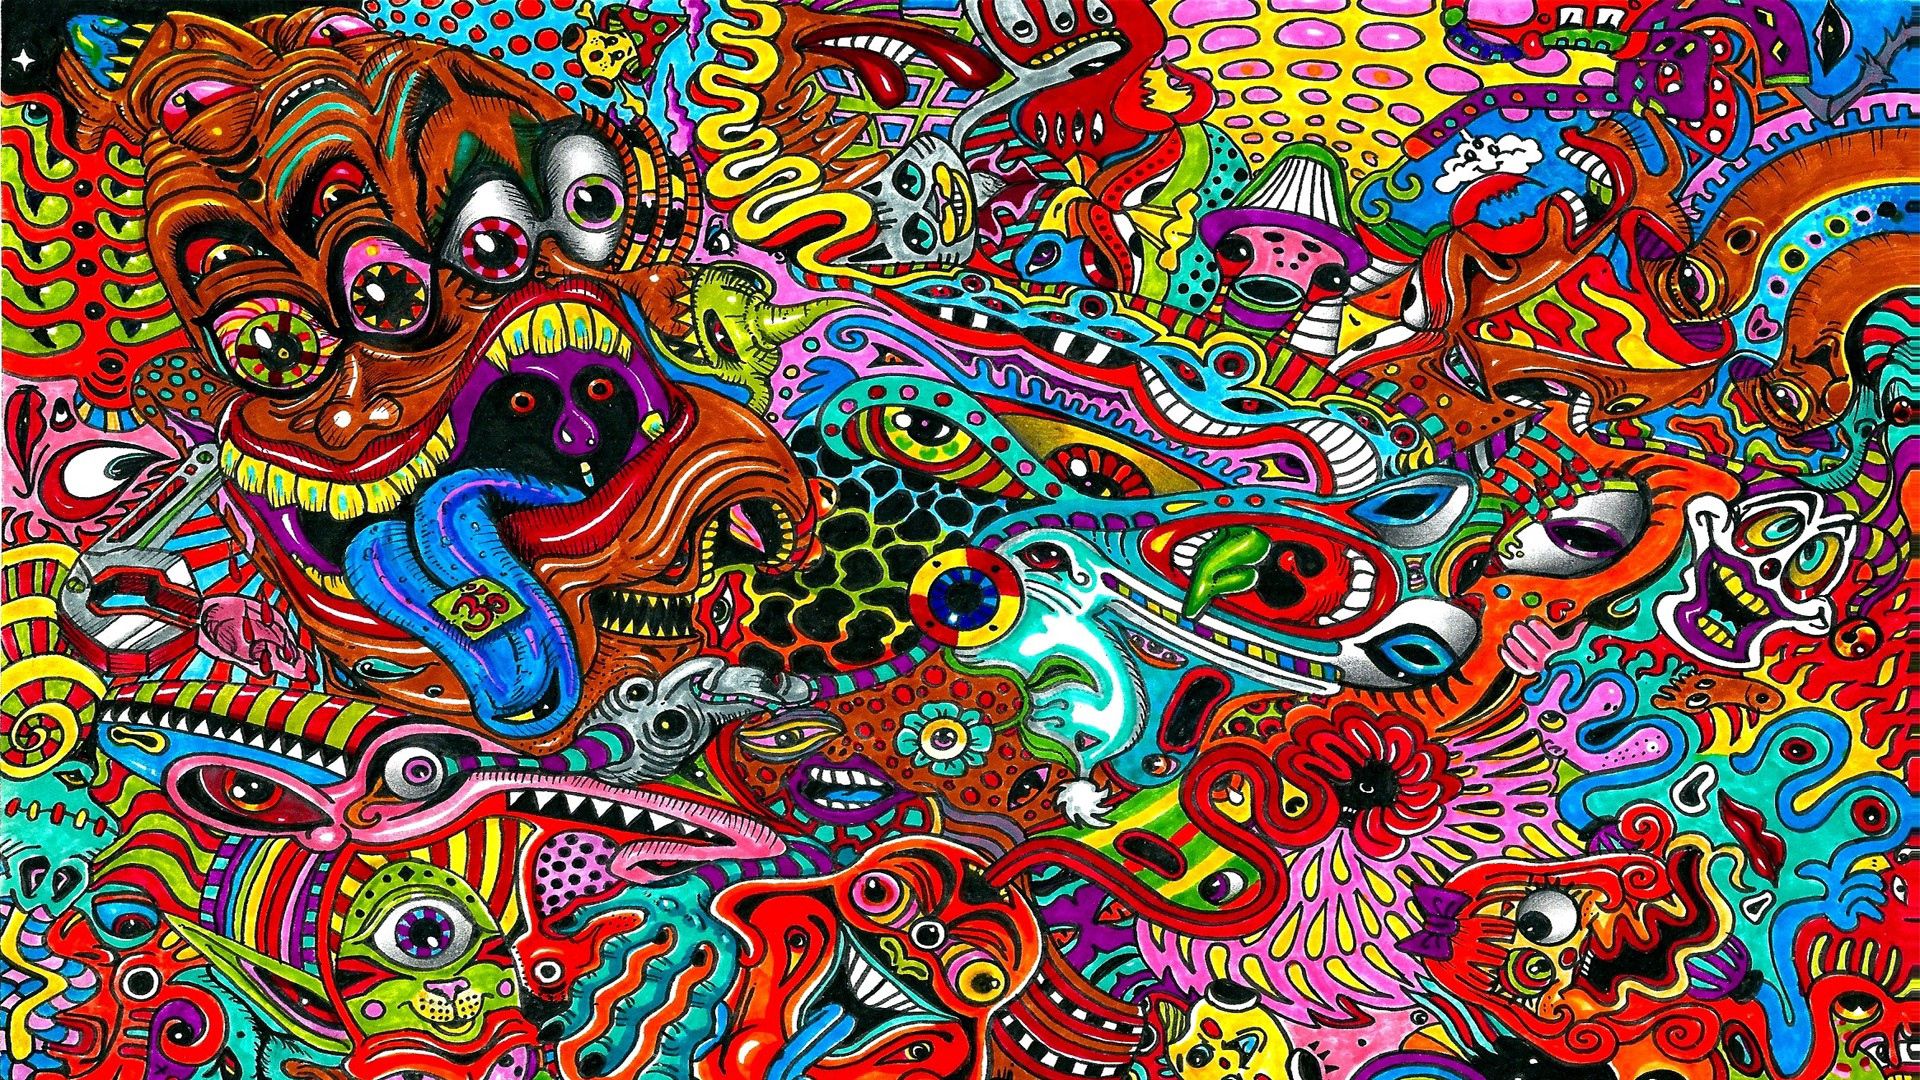 Download 1920x1080 drawing, surreal, colorful, psychedelic wallpaper, backg...